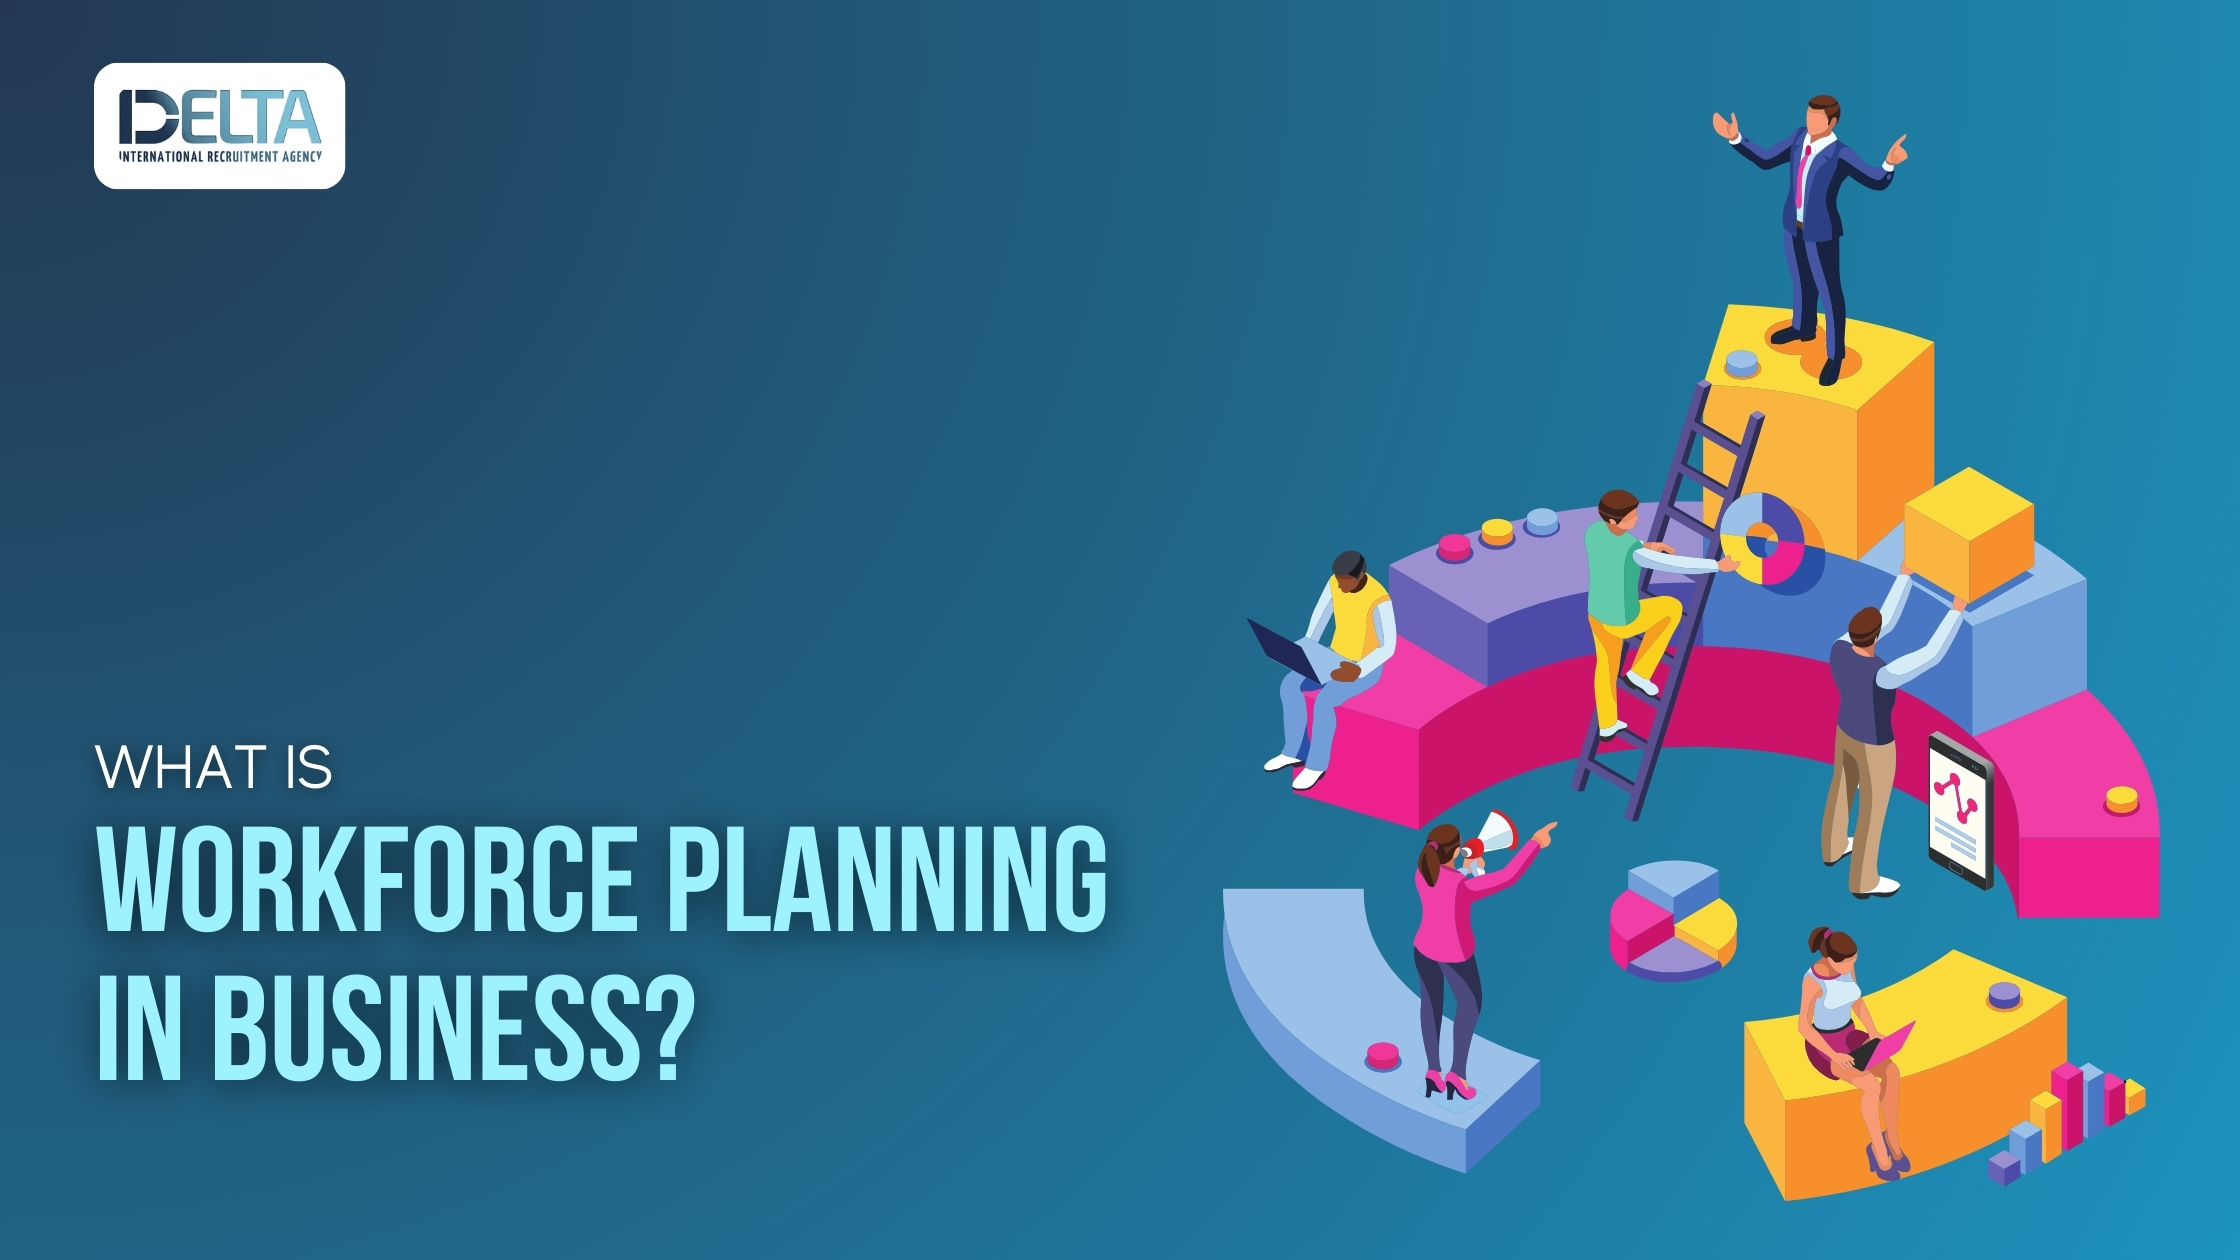 What is Workforce Planning in Business?